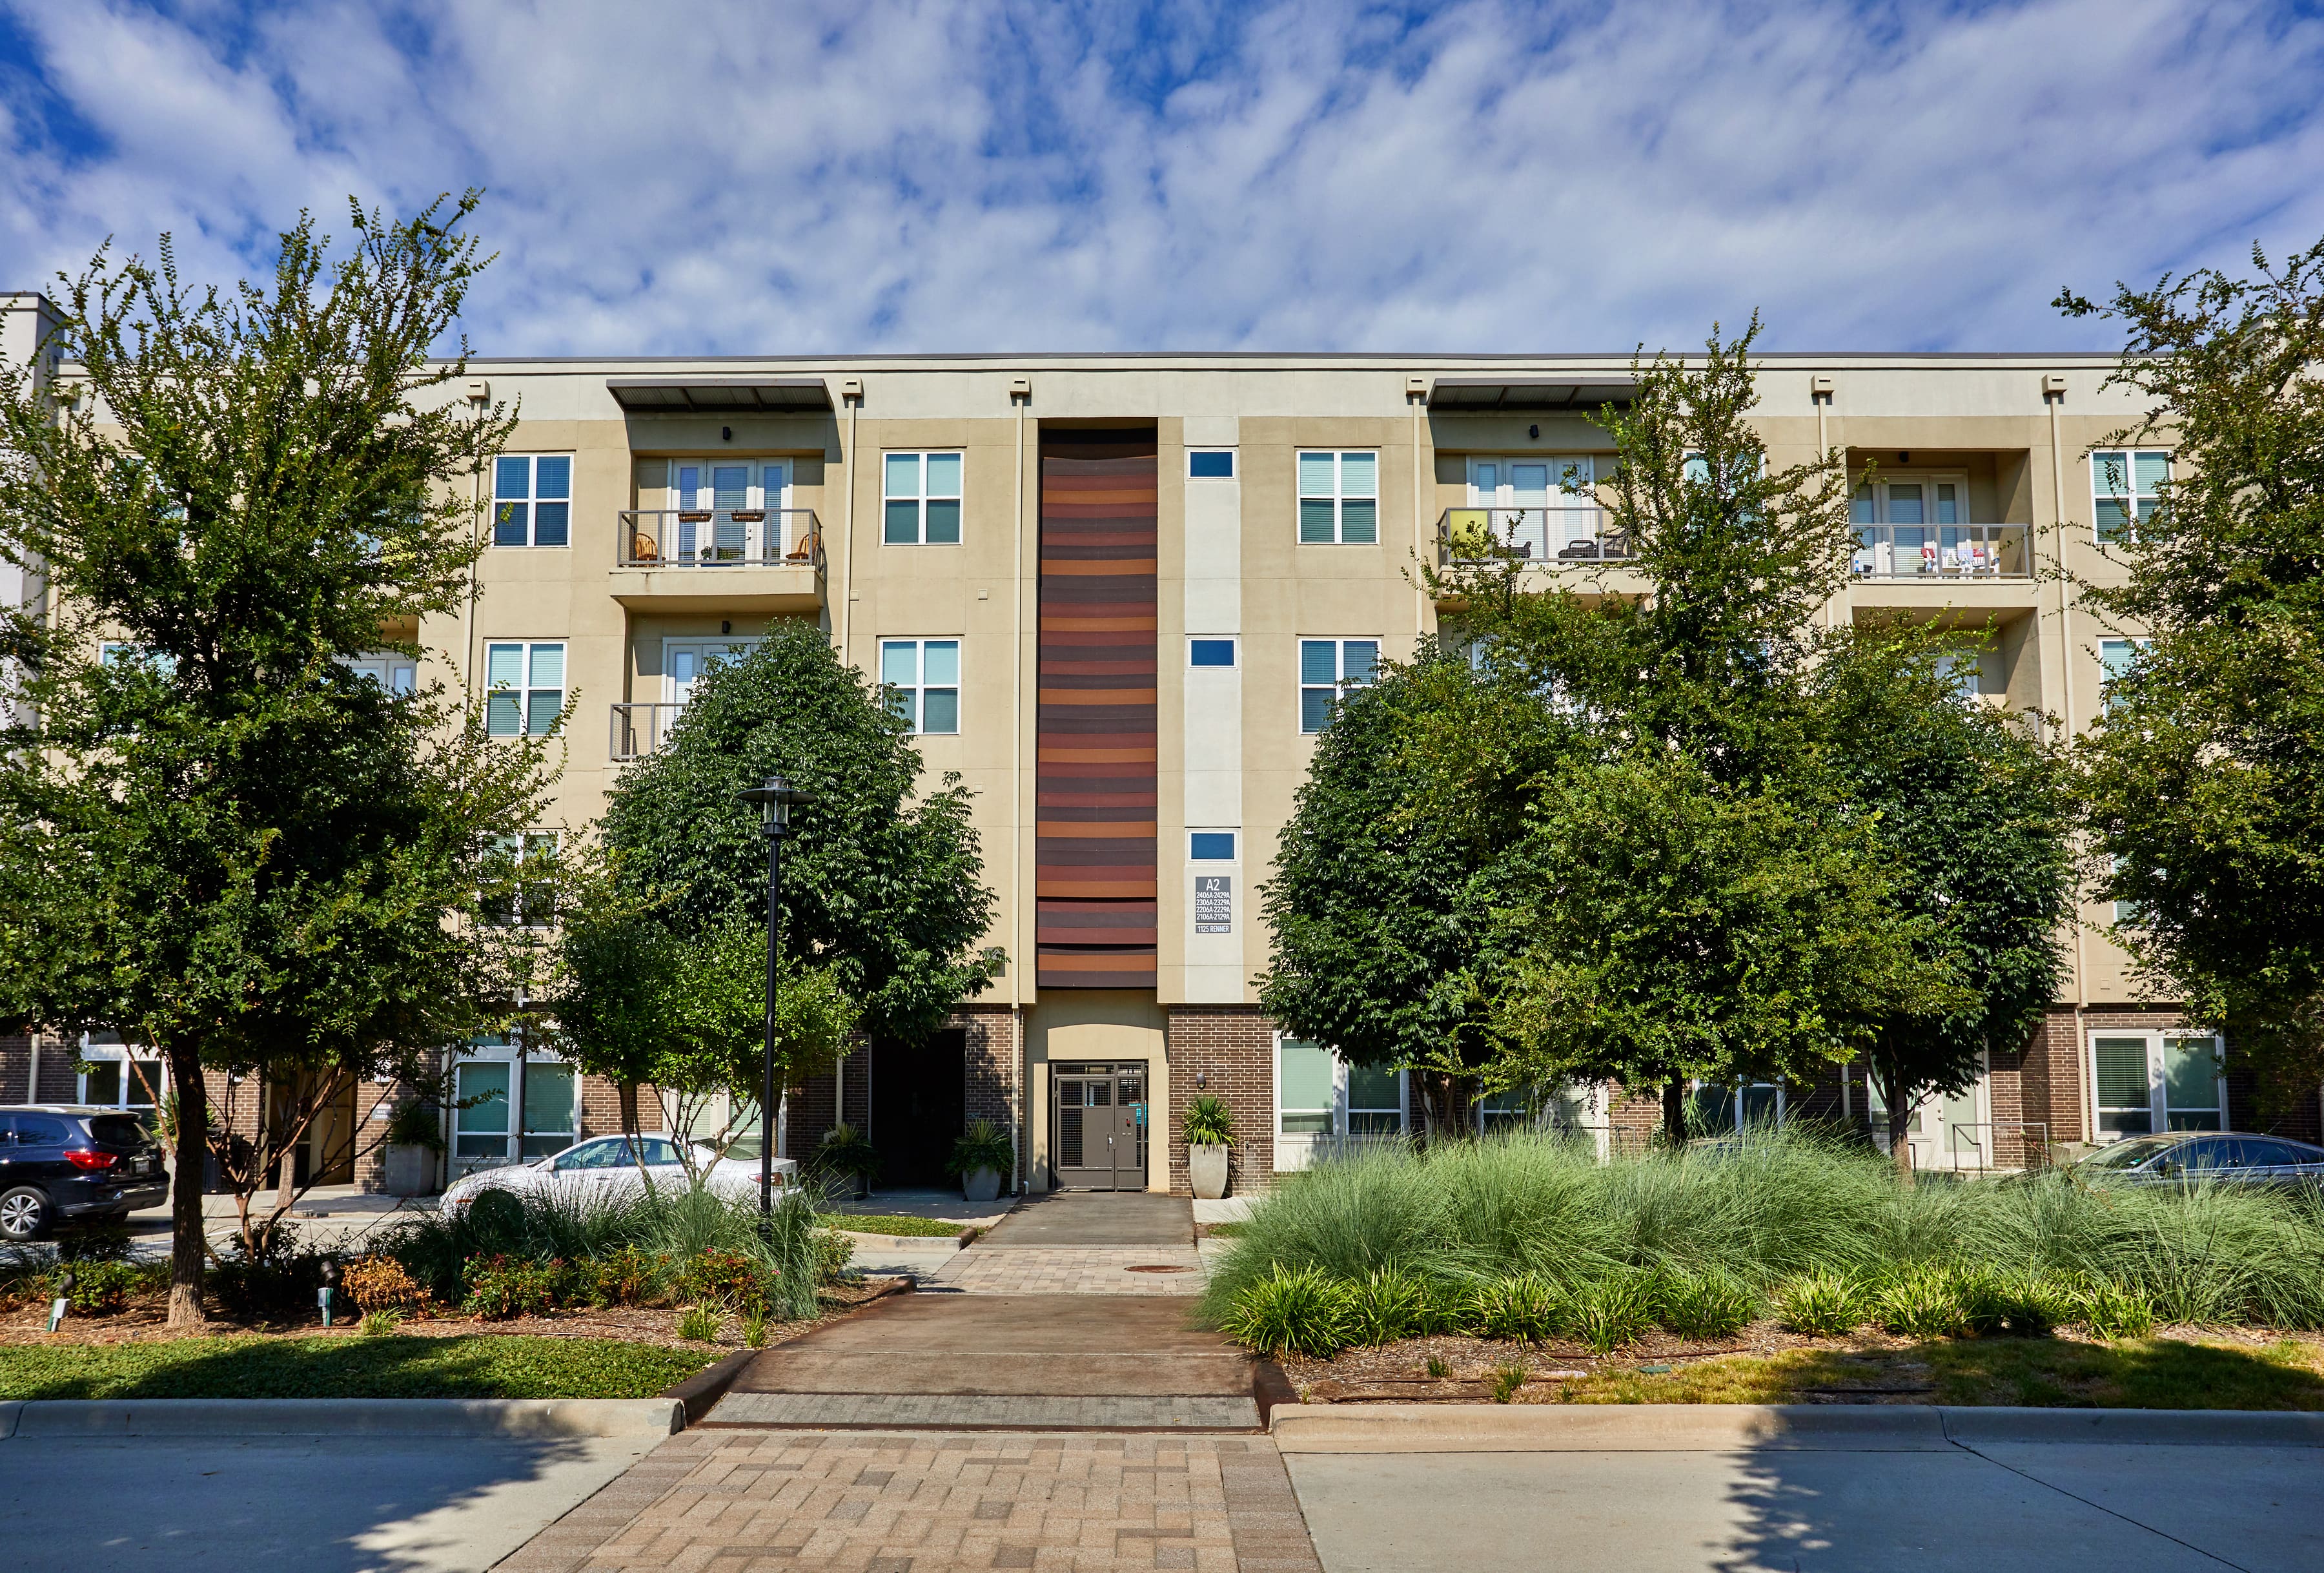 Exterior of the Standard at Cityline apartments in Richardson, TX